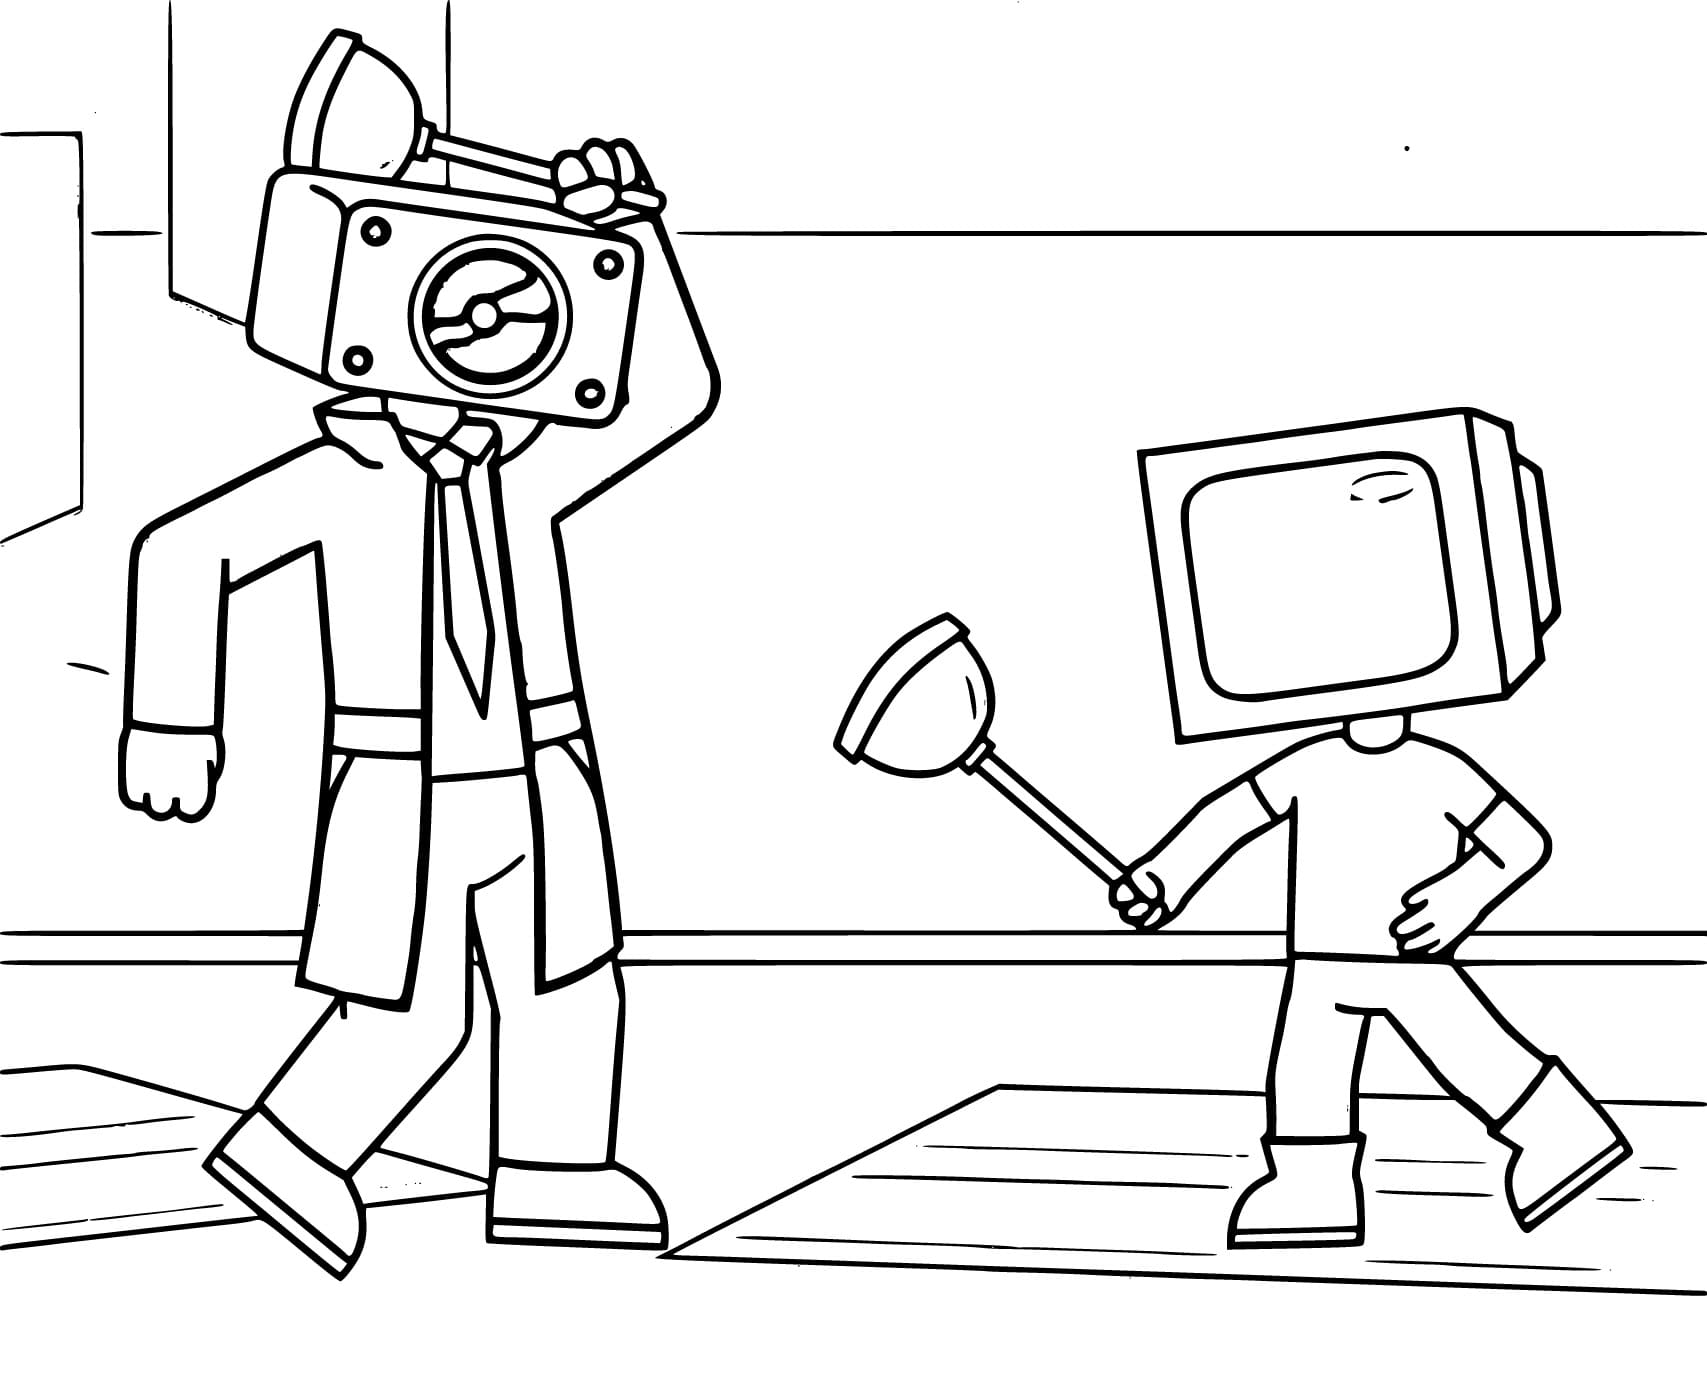 Speakerman and TV Woman coloring page - Download, Print or Color Online ...